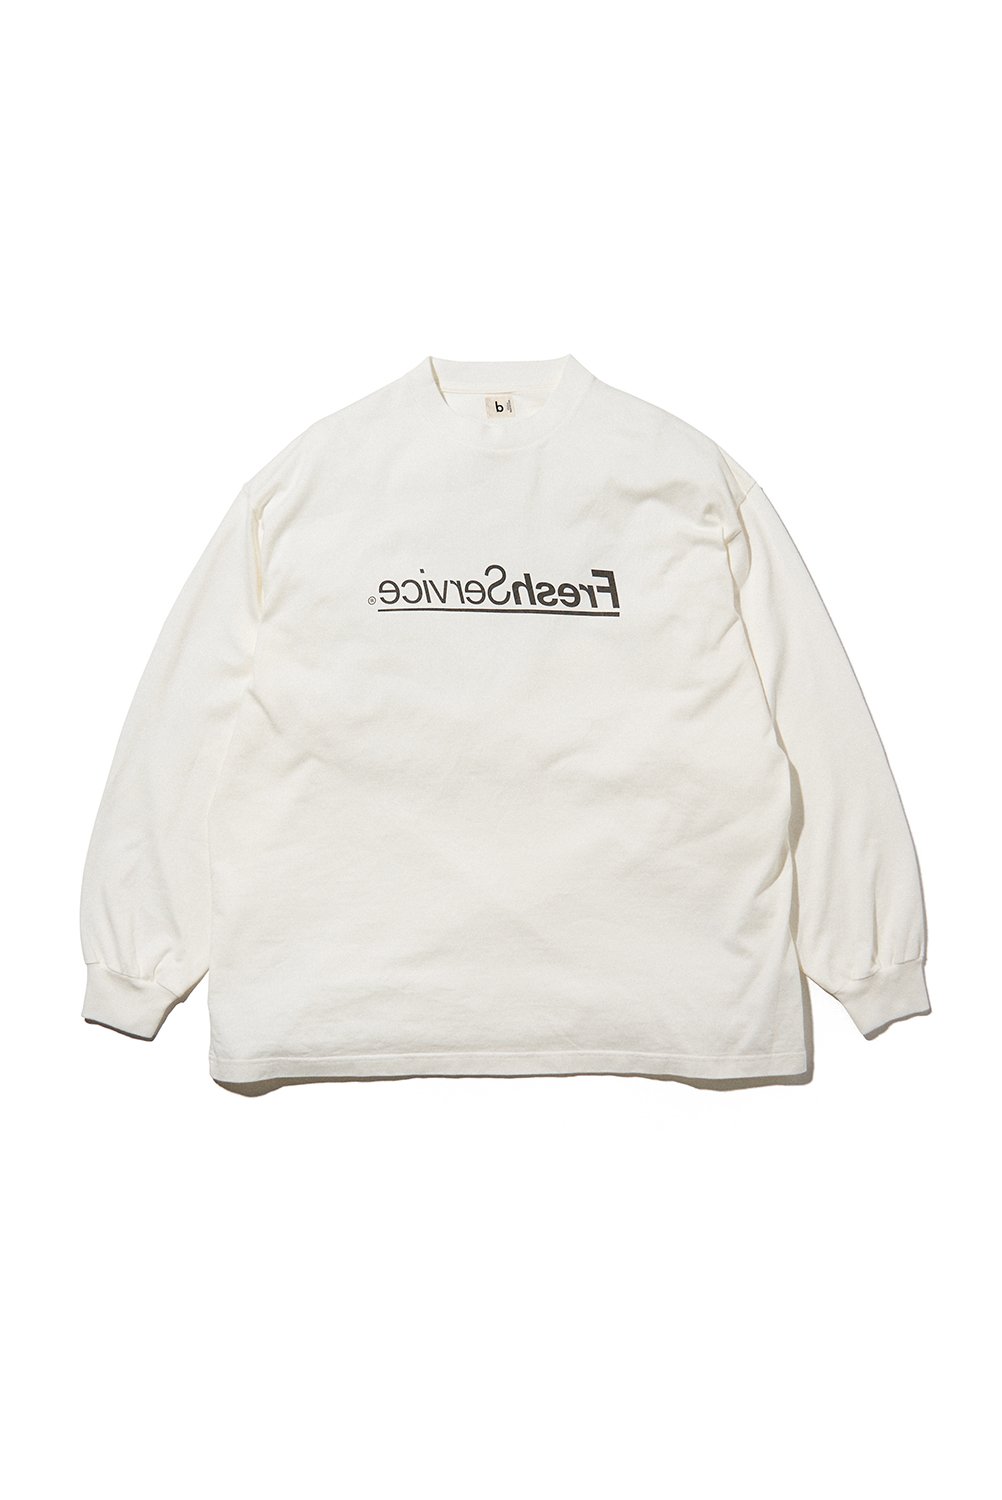 blurhms ROOTSTOCK and FreshService Collaborate on a Long-Sleeve